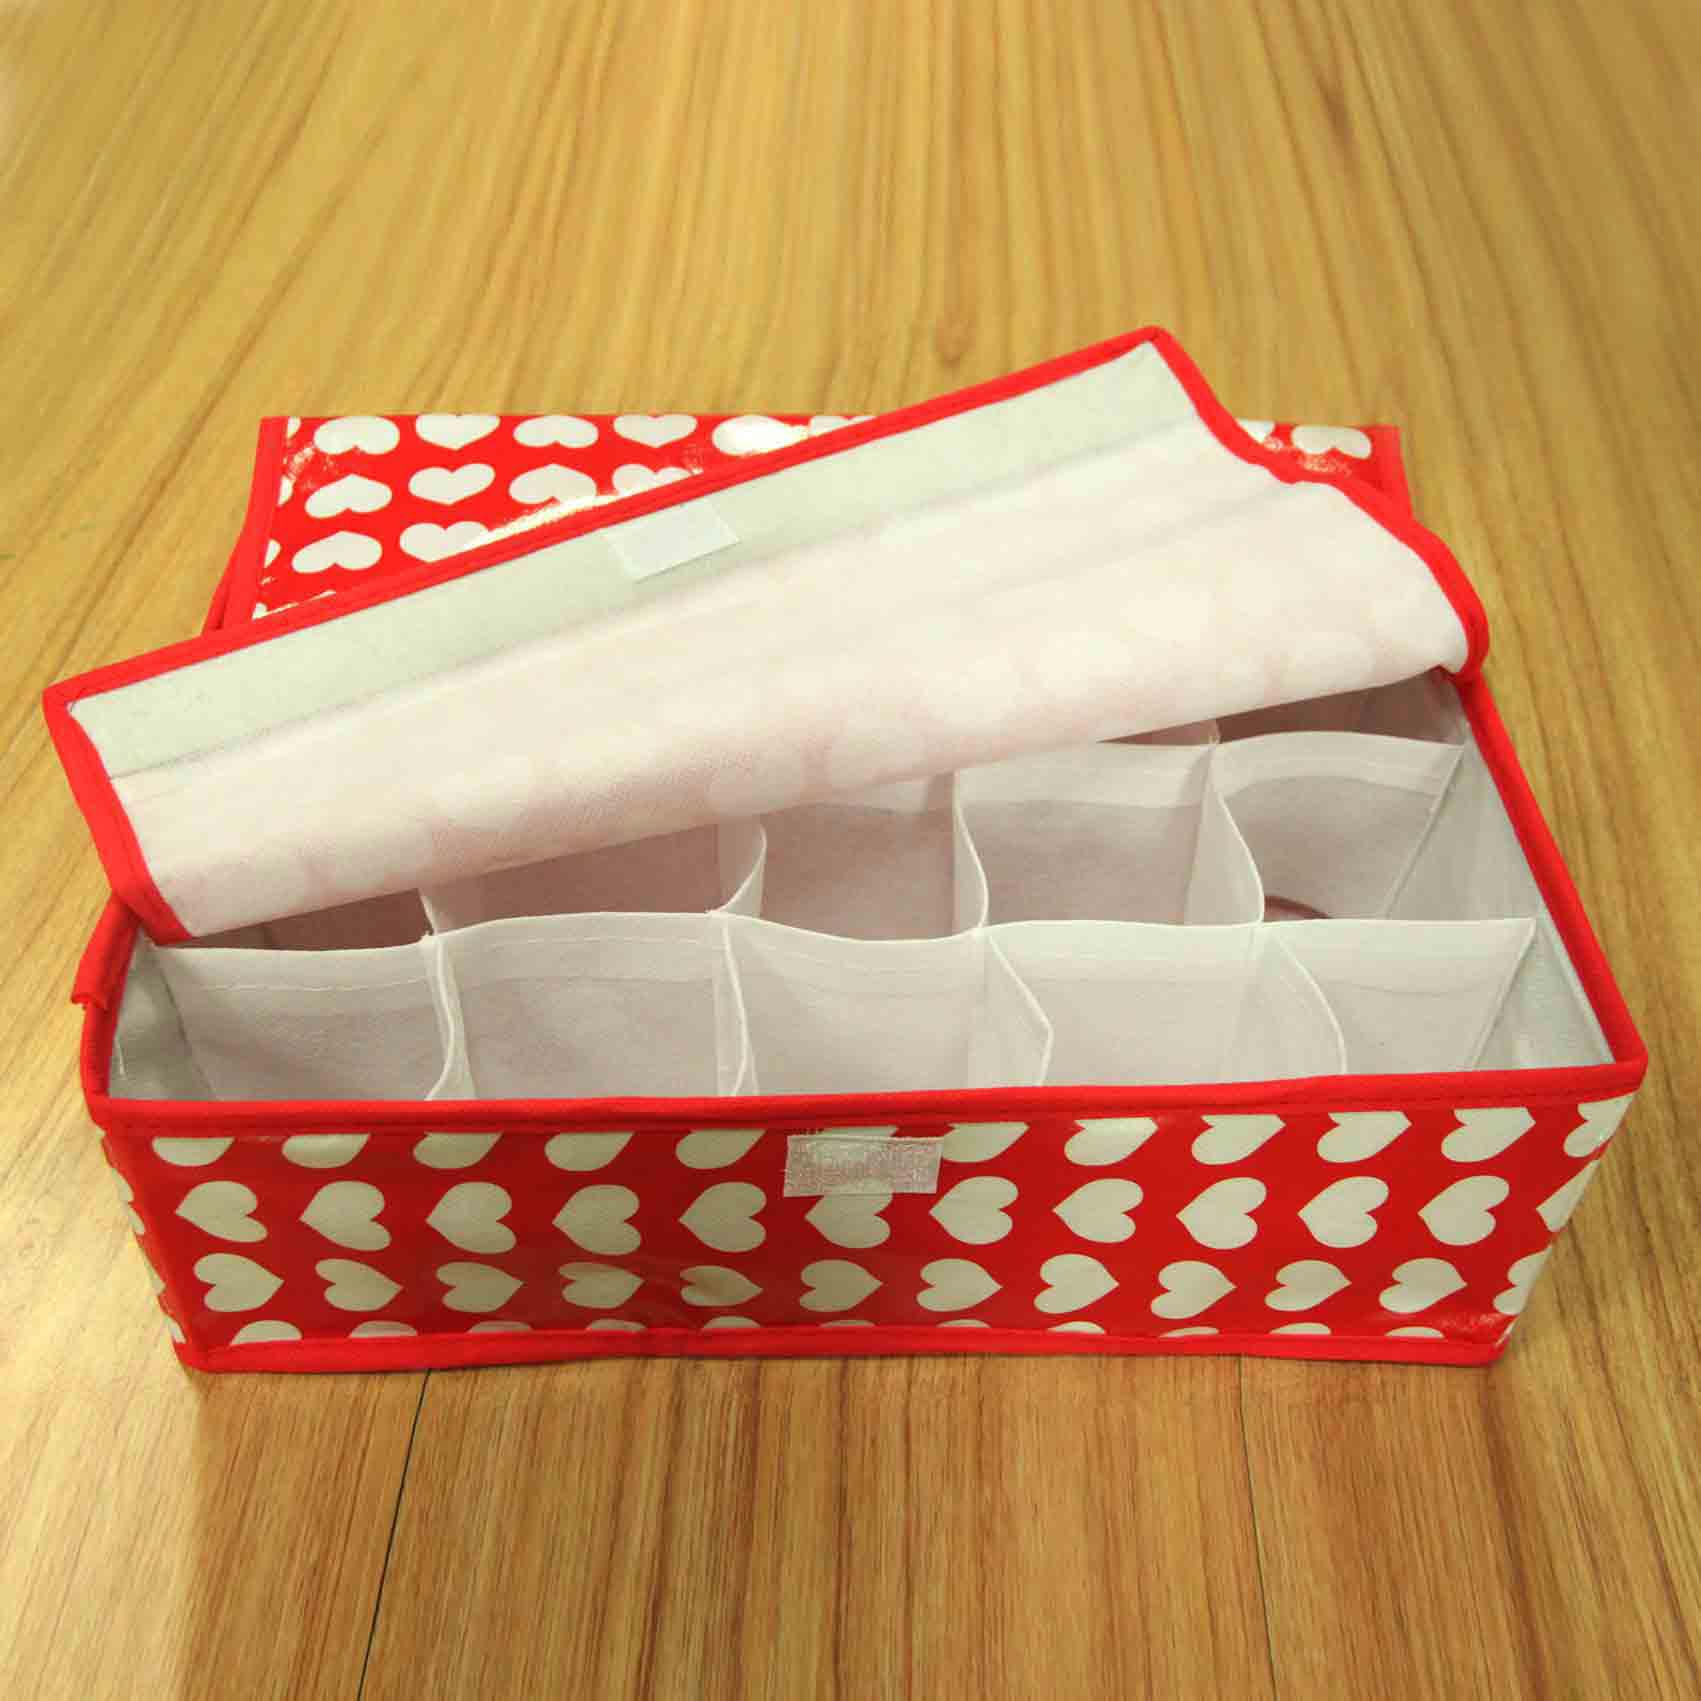 The use and function of non-woven box